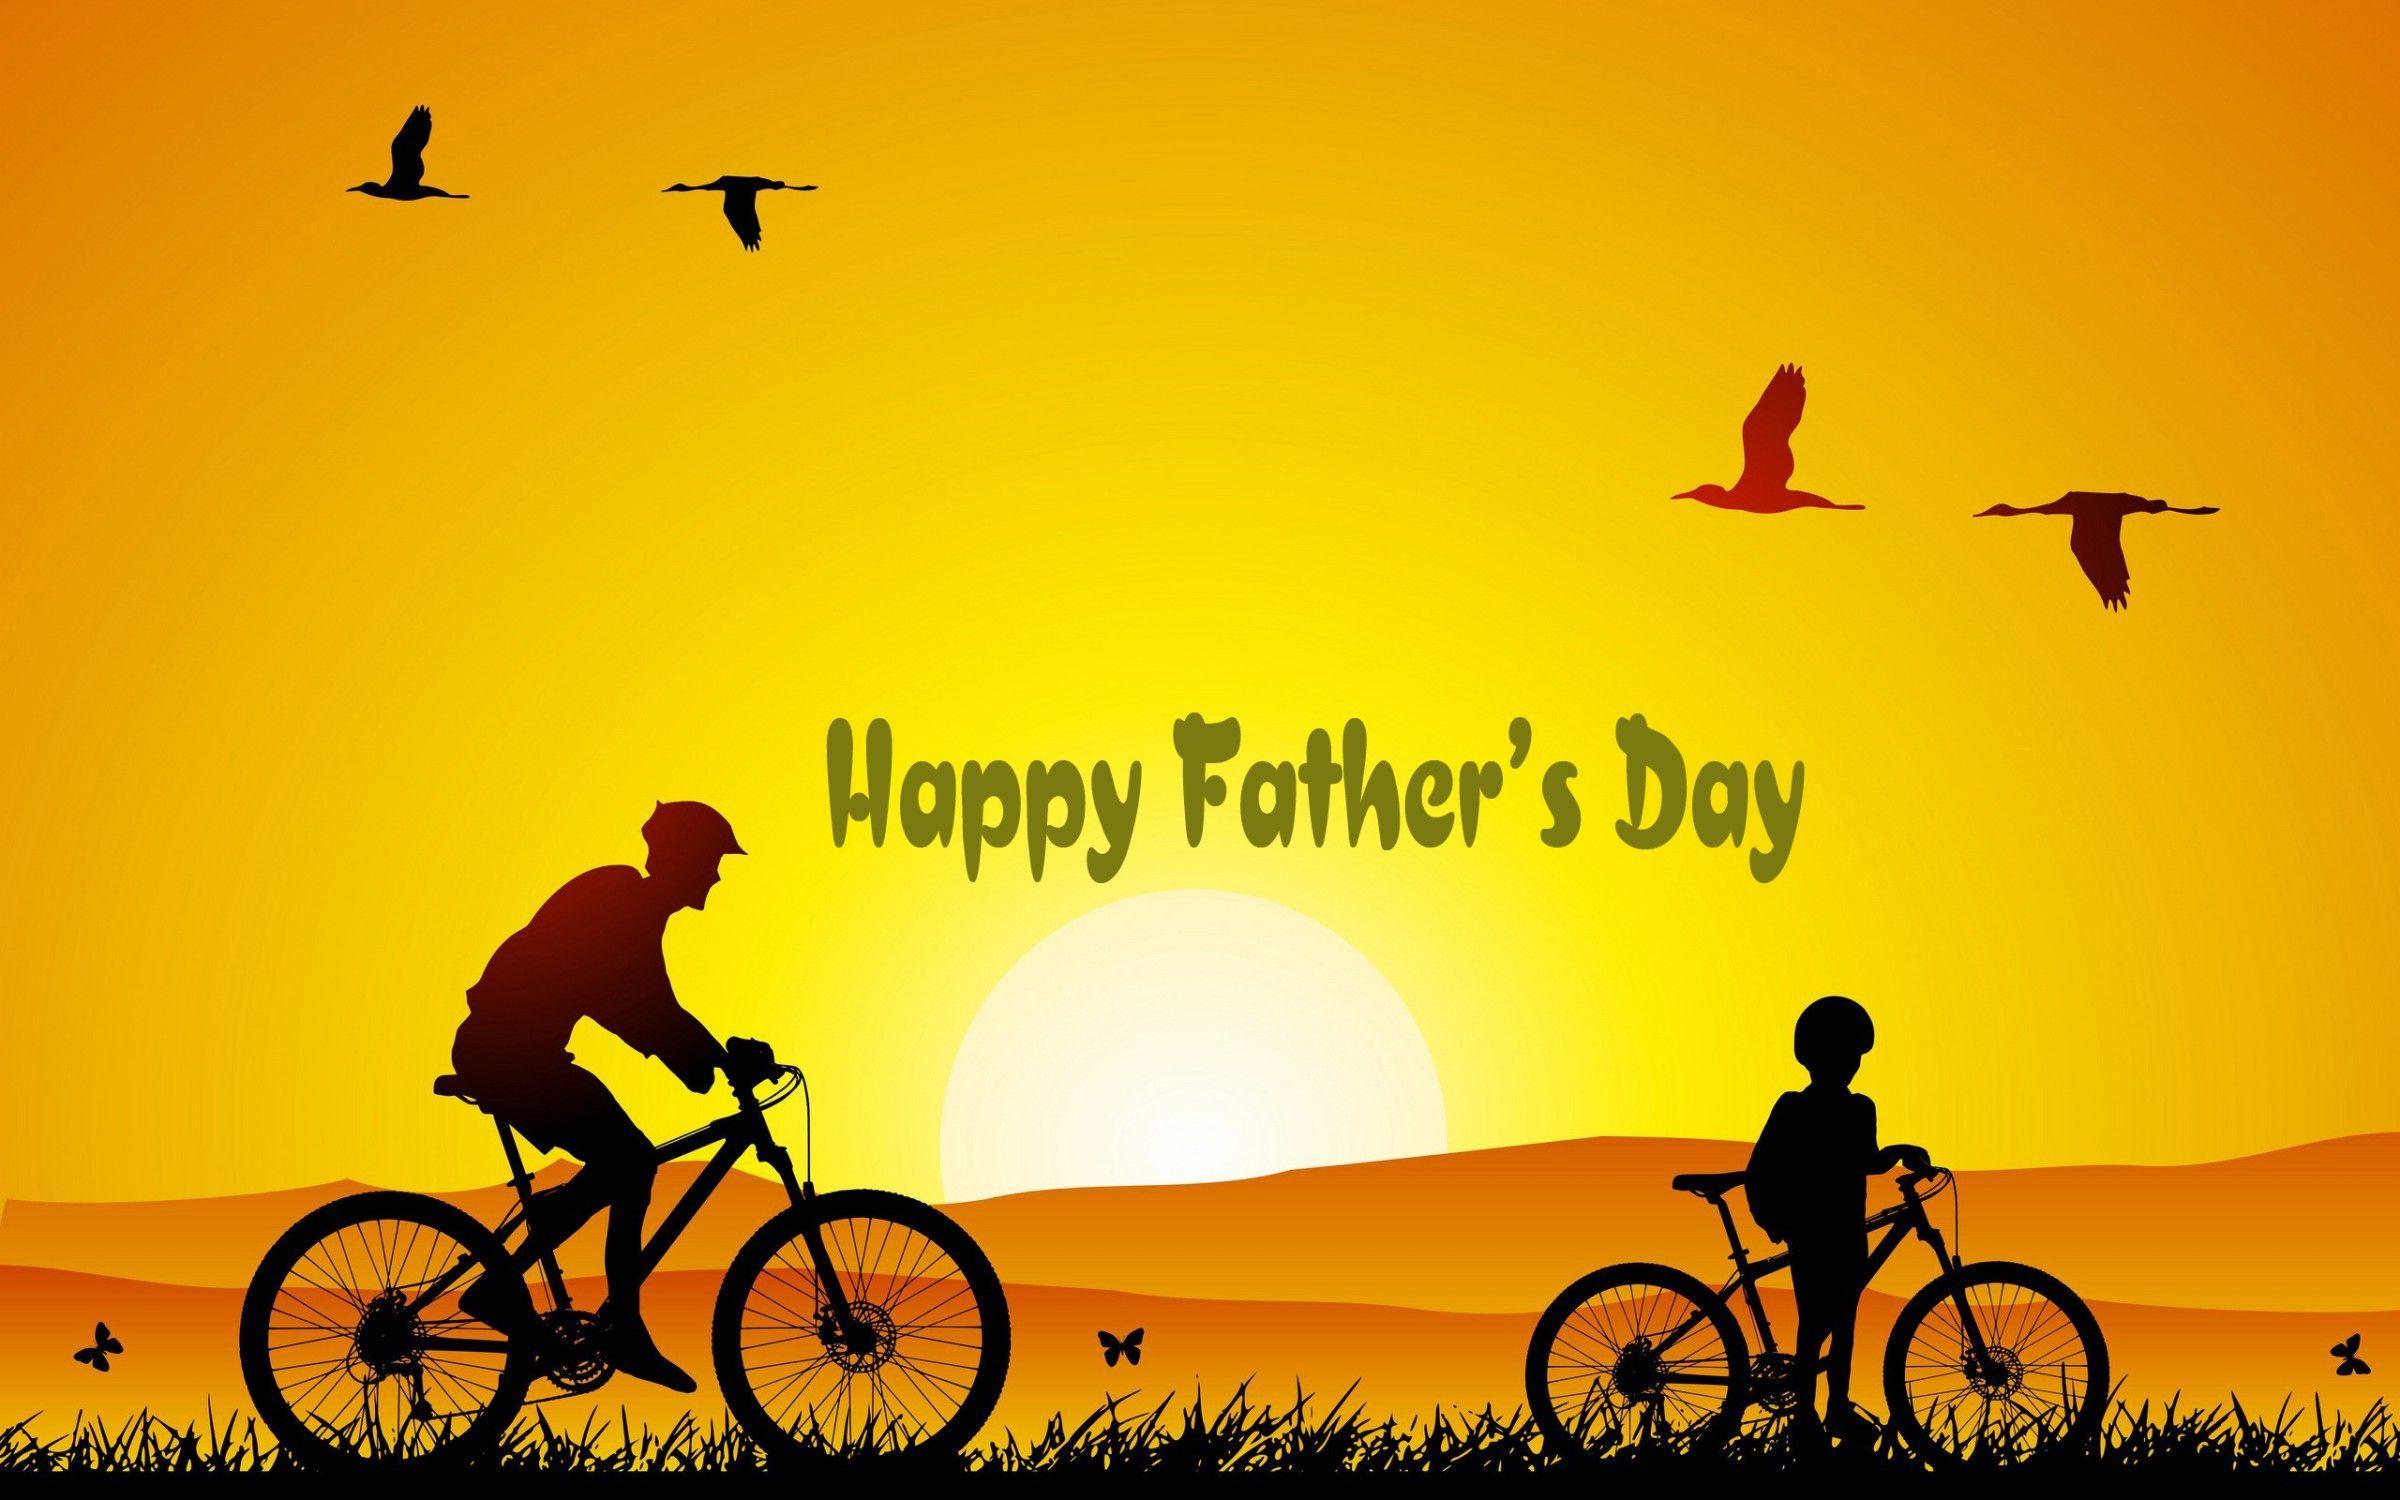 Happy Father's Day HD Wallpaper For Friends. Mother's Day